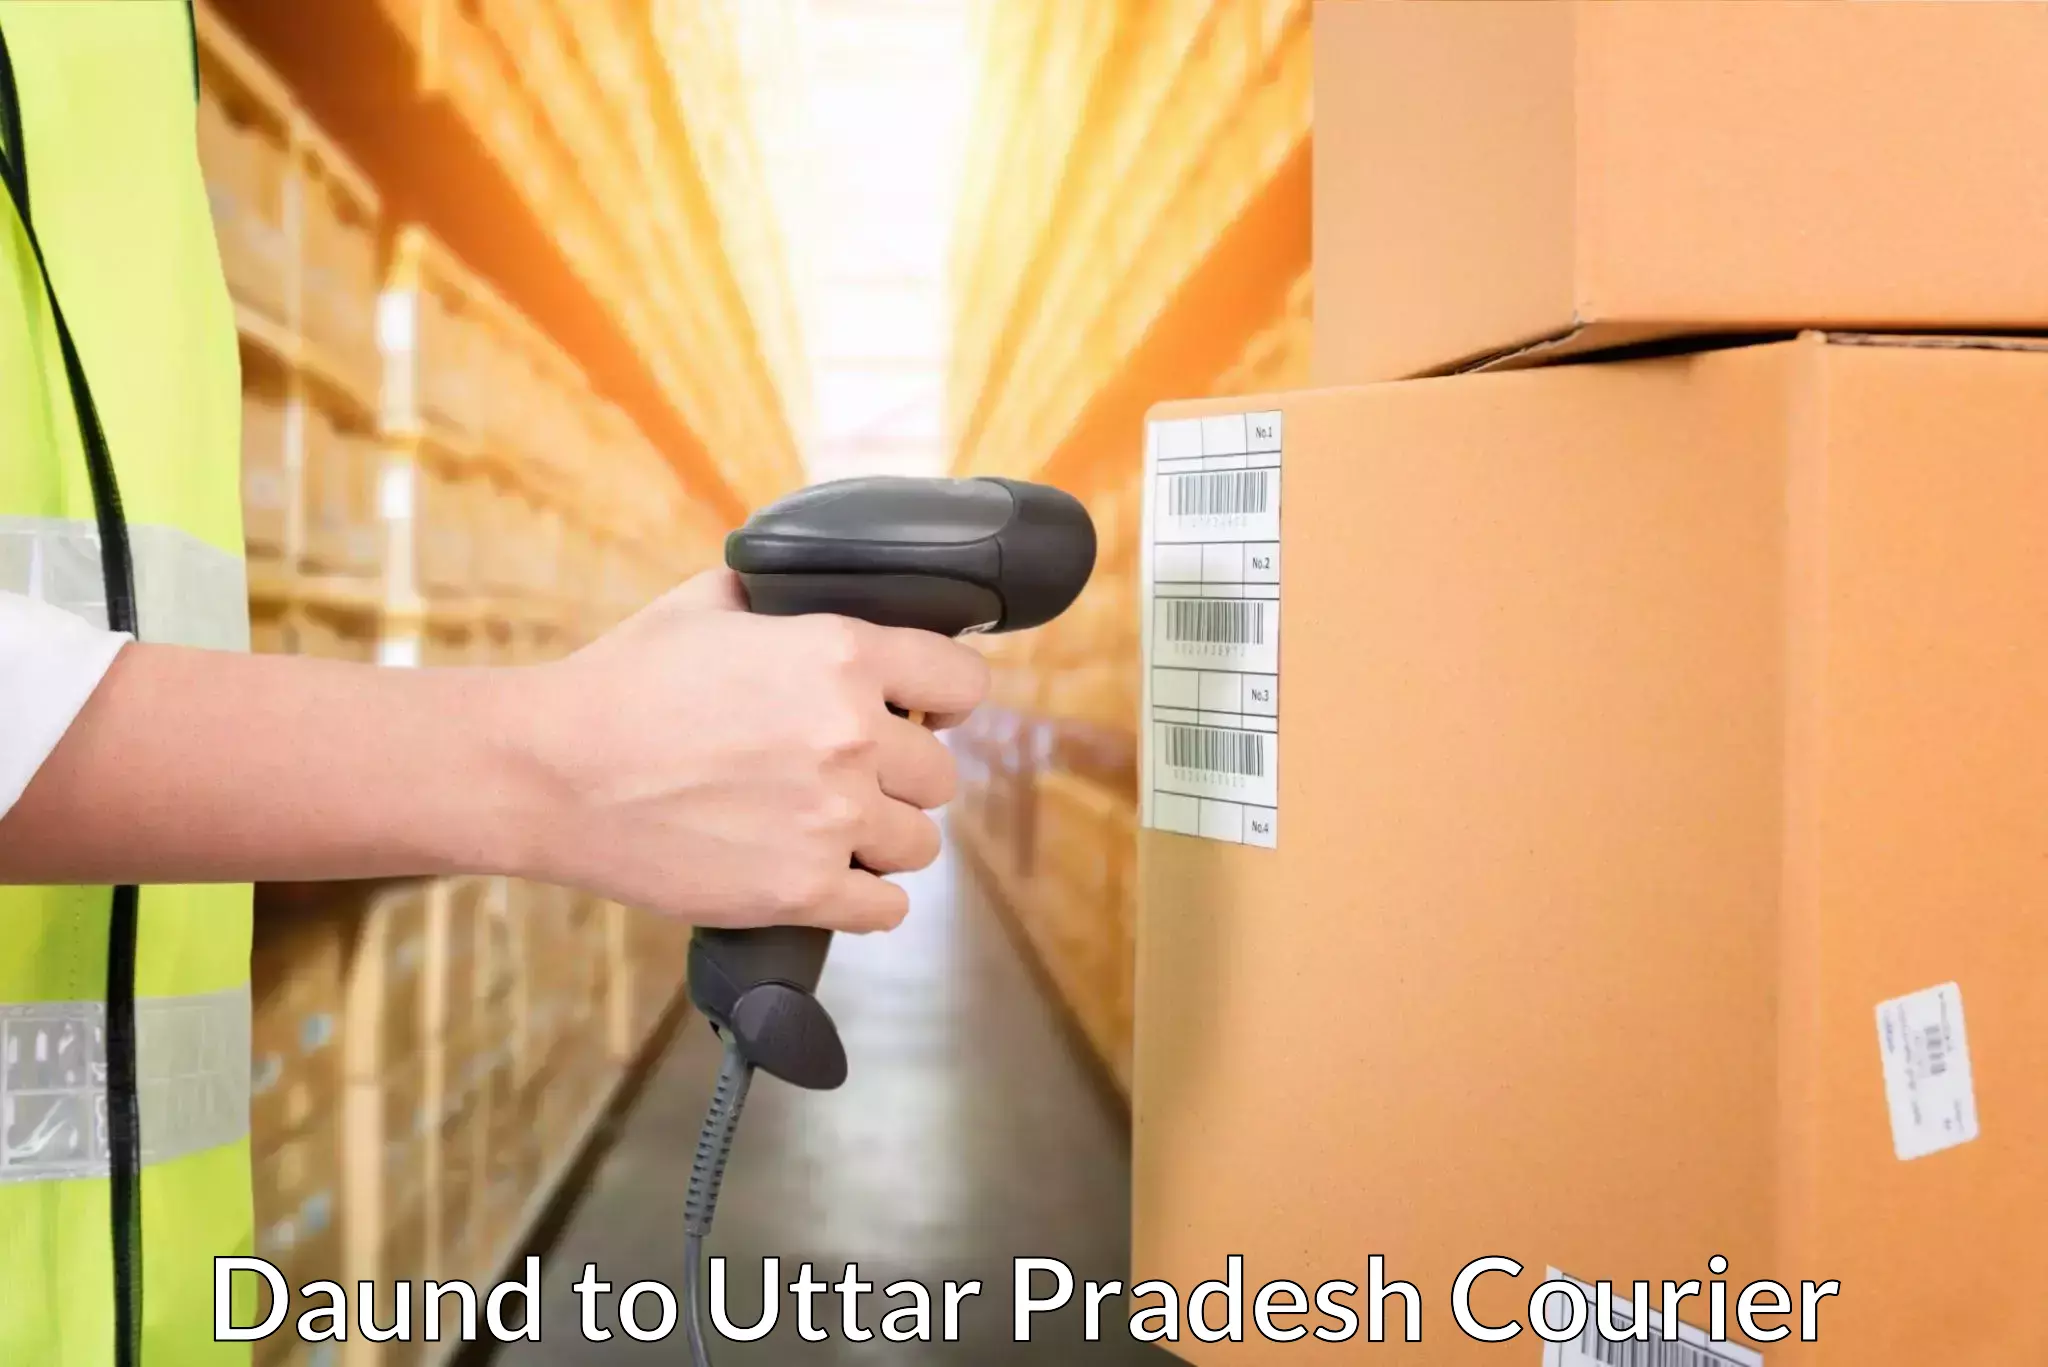 Fast-track shipping solutions Daund to Aligarh